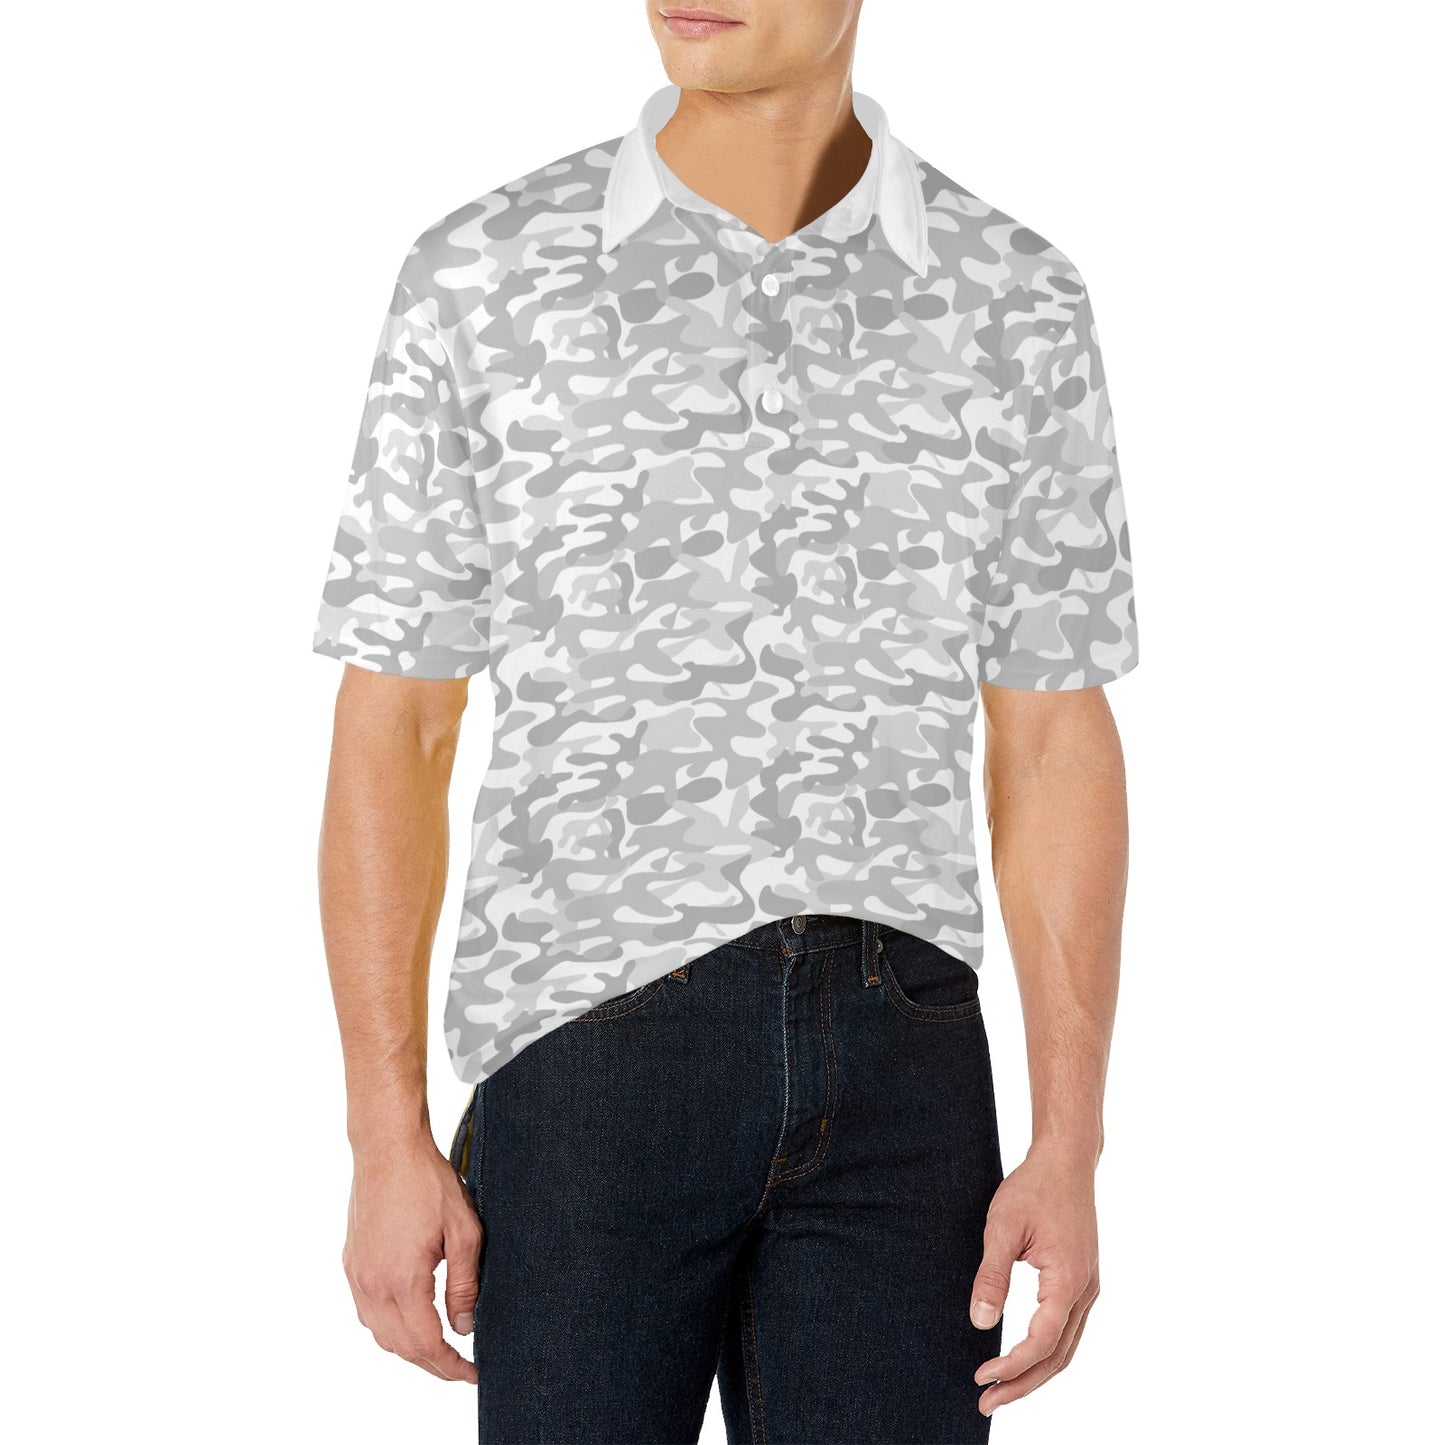 White Camouflage Men Polo Collared Shirt, Camo Pattern Casual Summer Guys Buttoned Down Up TShirt Short Sleeve Sports Golf Tee